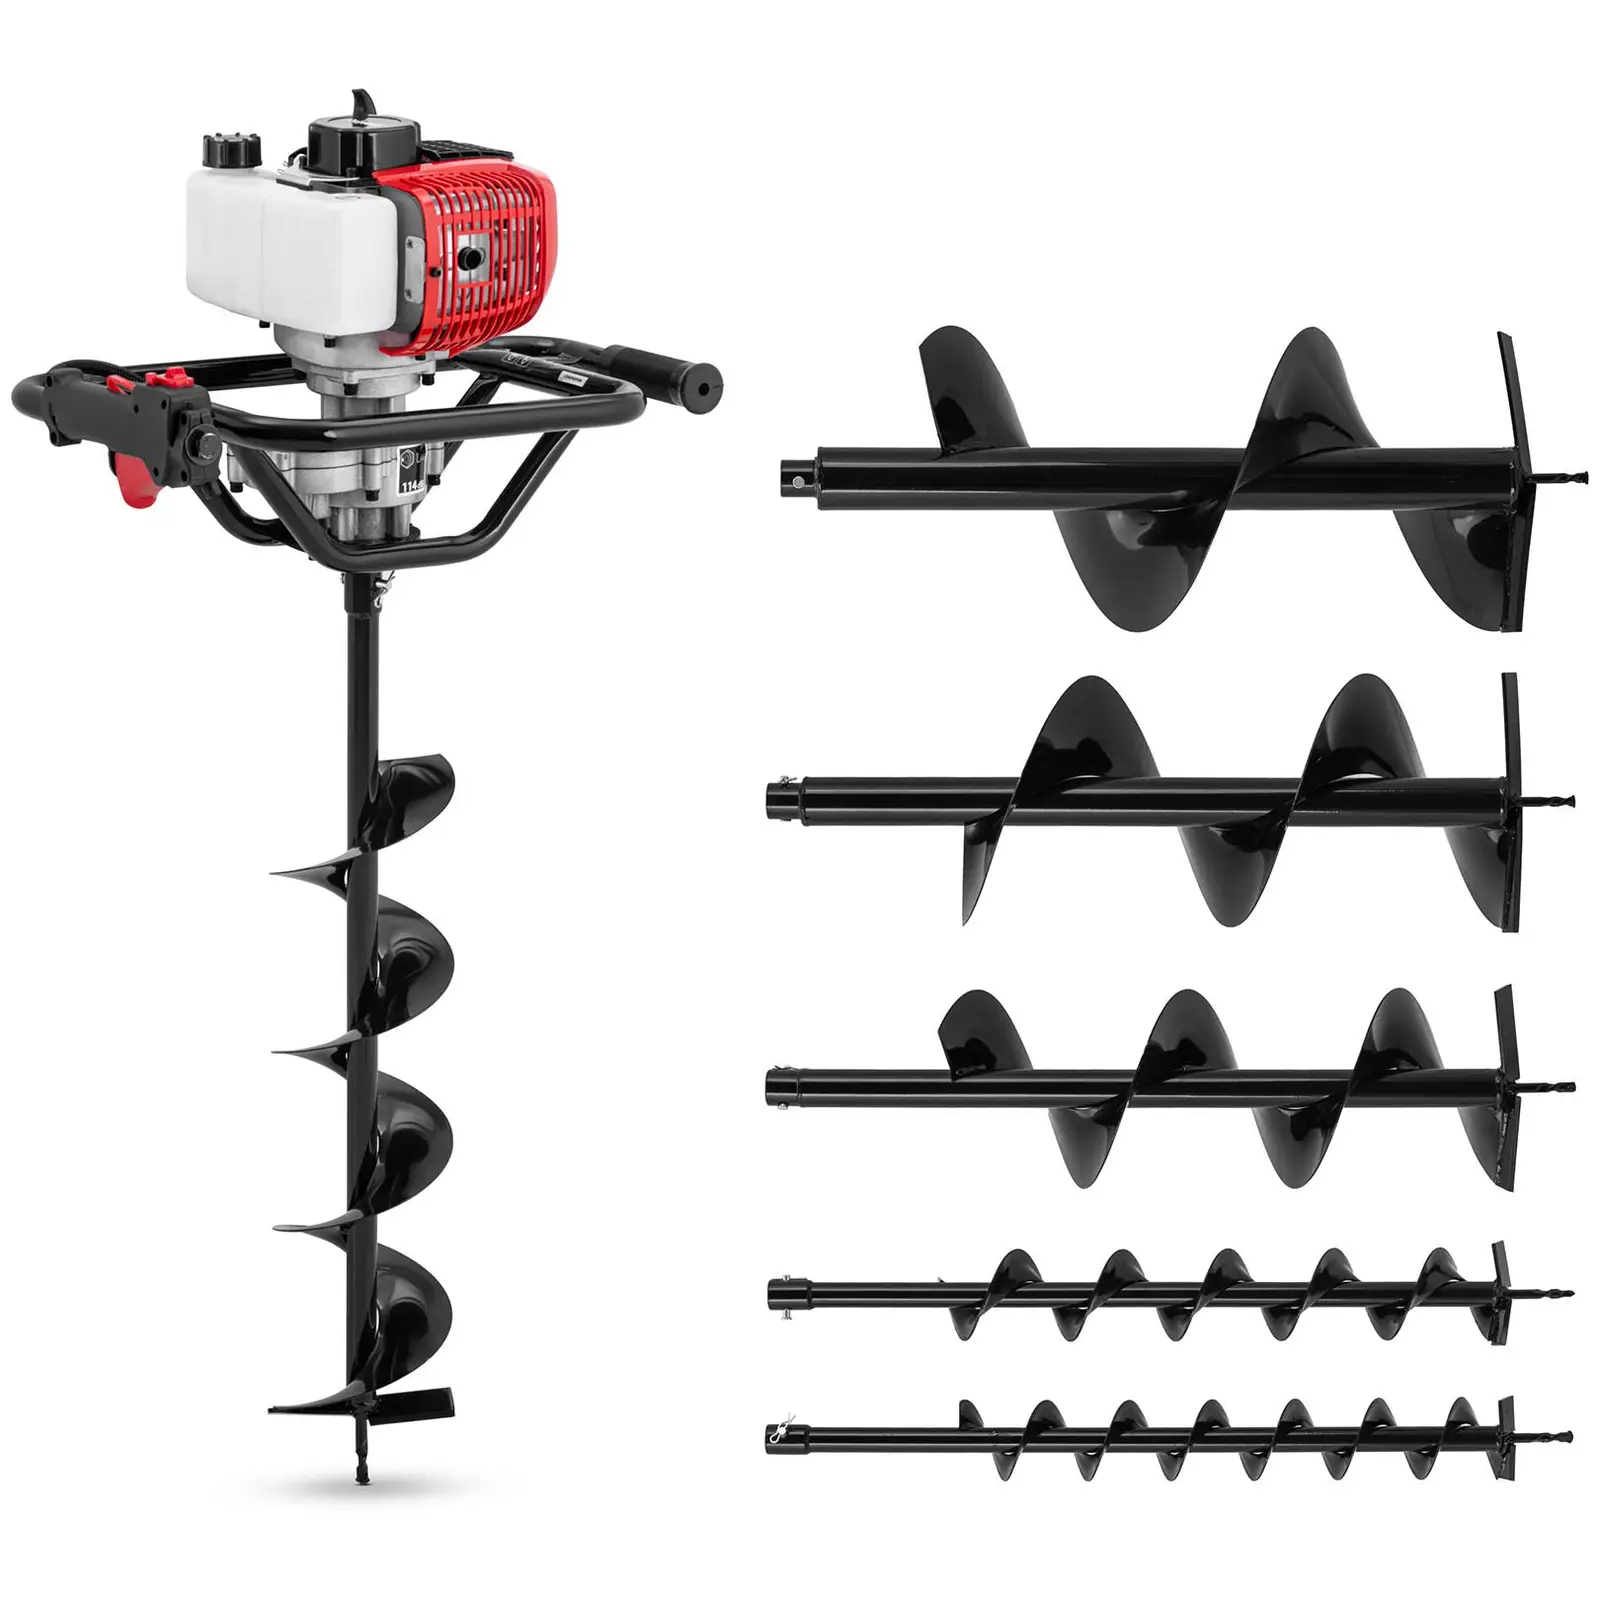 Auger set - 1.6 kW - incl. 6 augers and 2 extensions